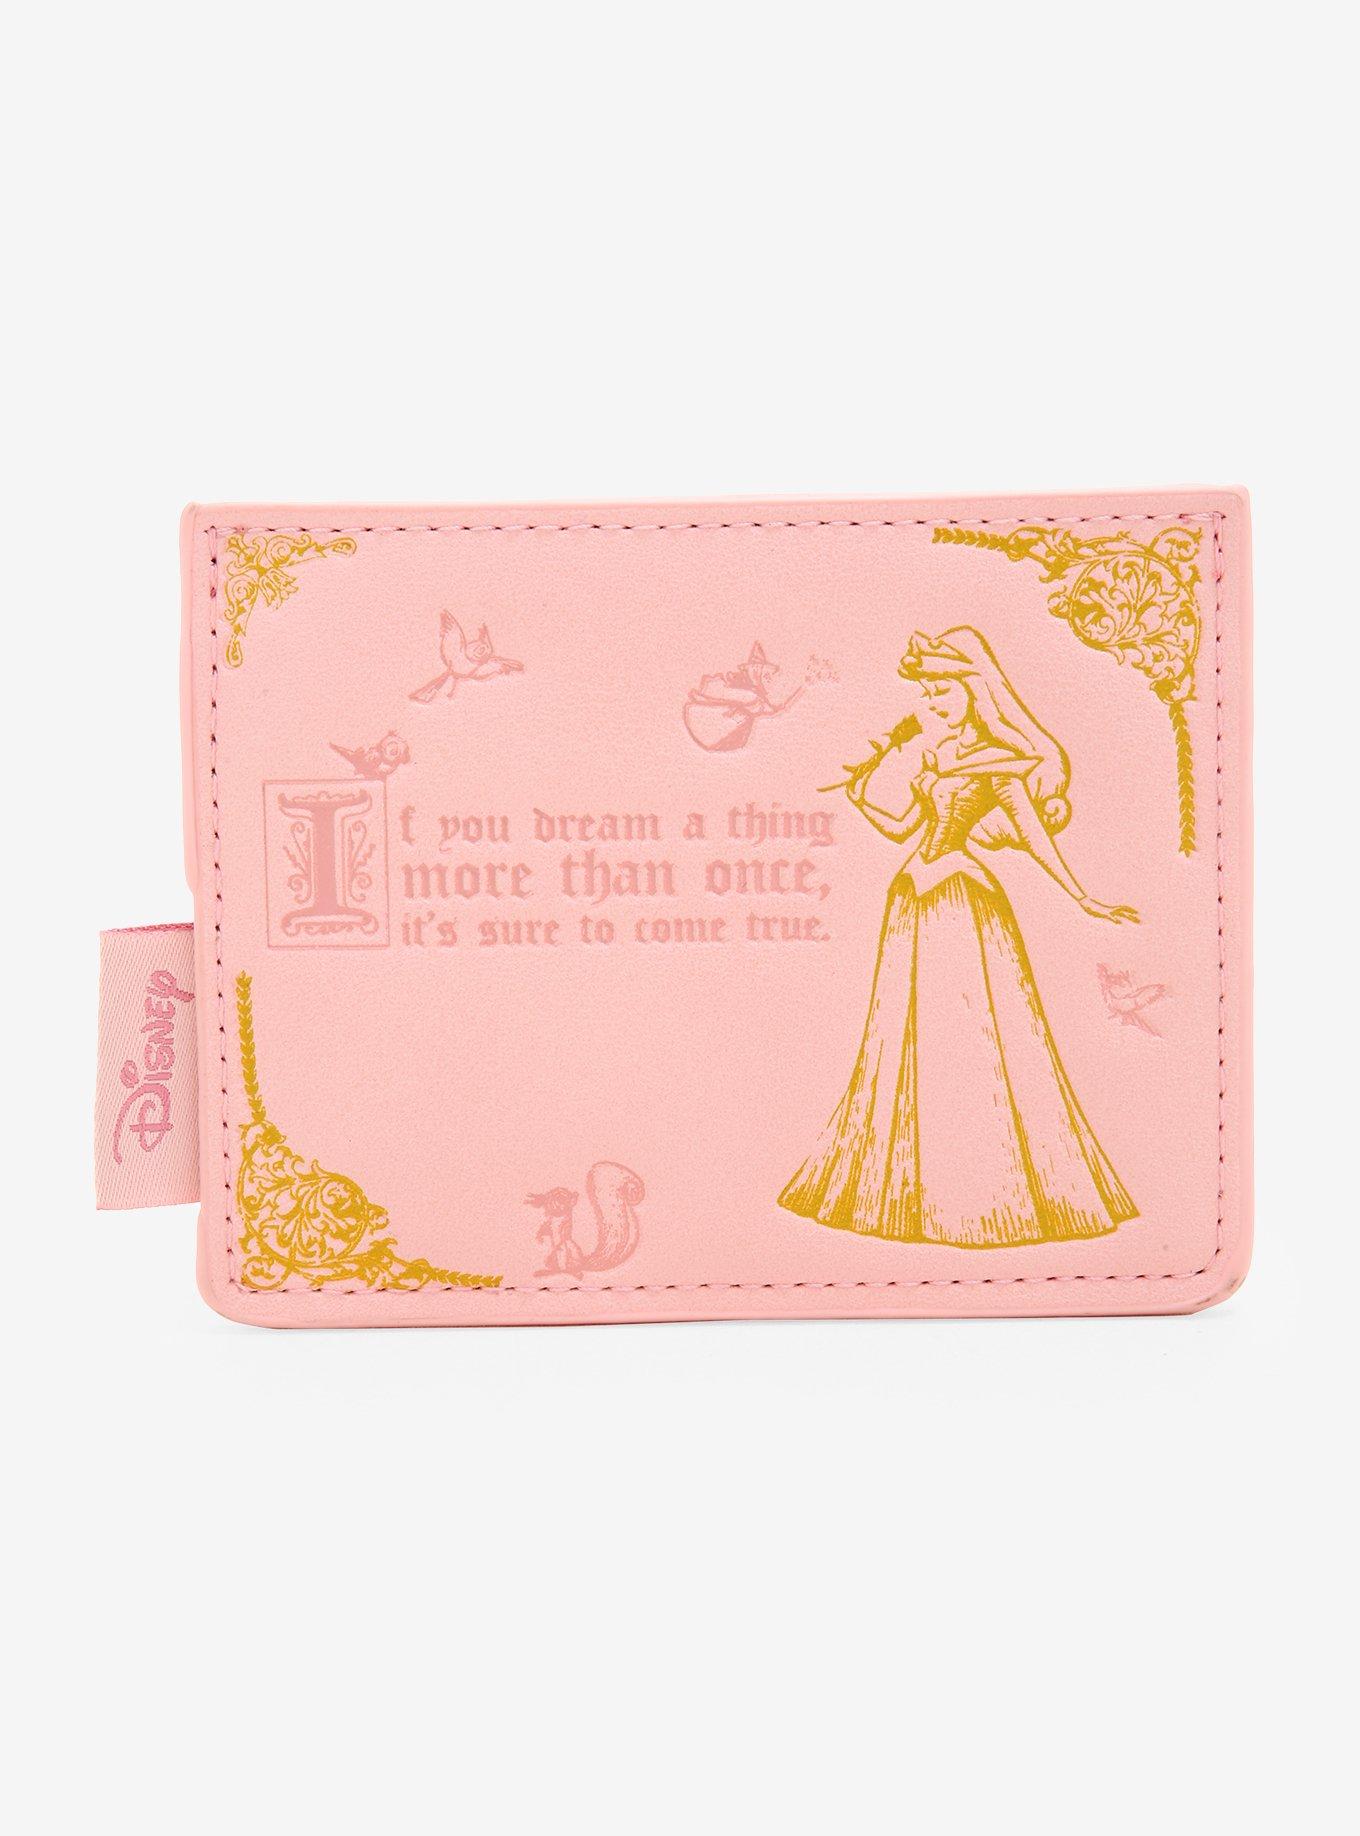 Loungefly Disney Sleeping Beauty Fairies Cardholder - BoxLunch Exclusive, , hi-res